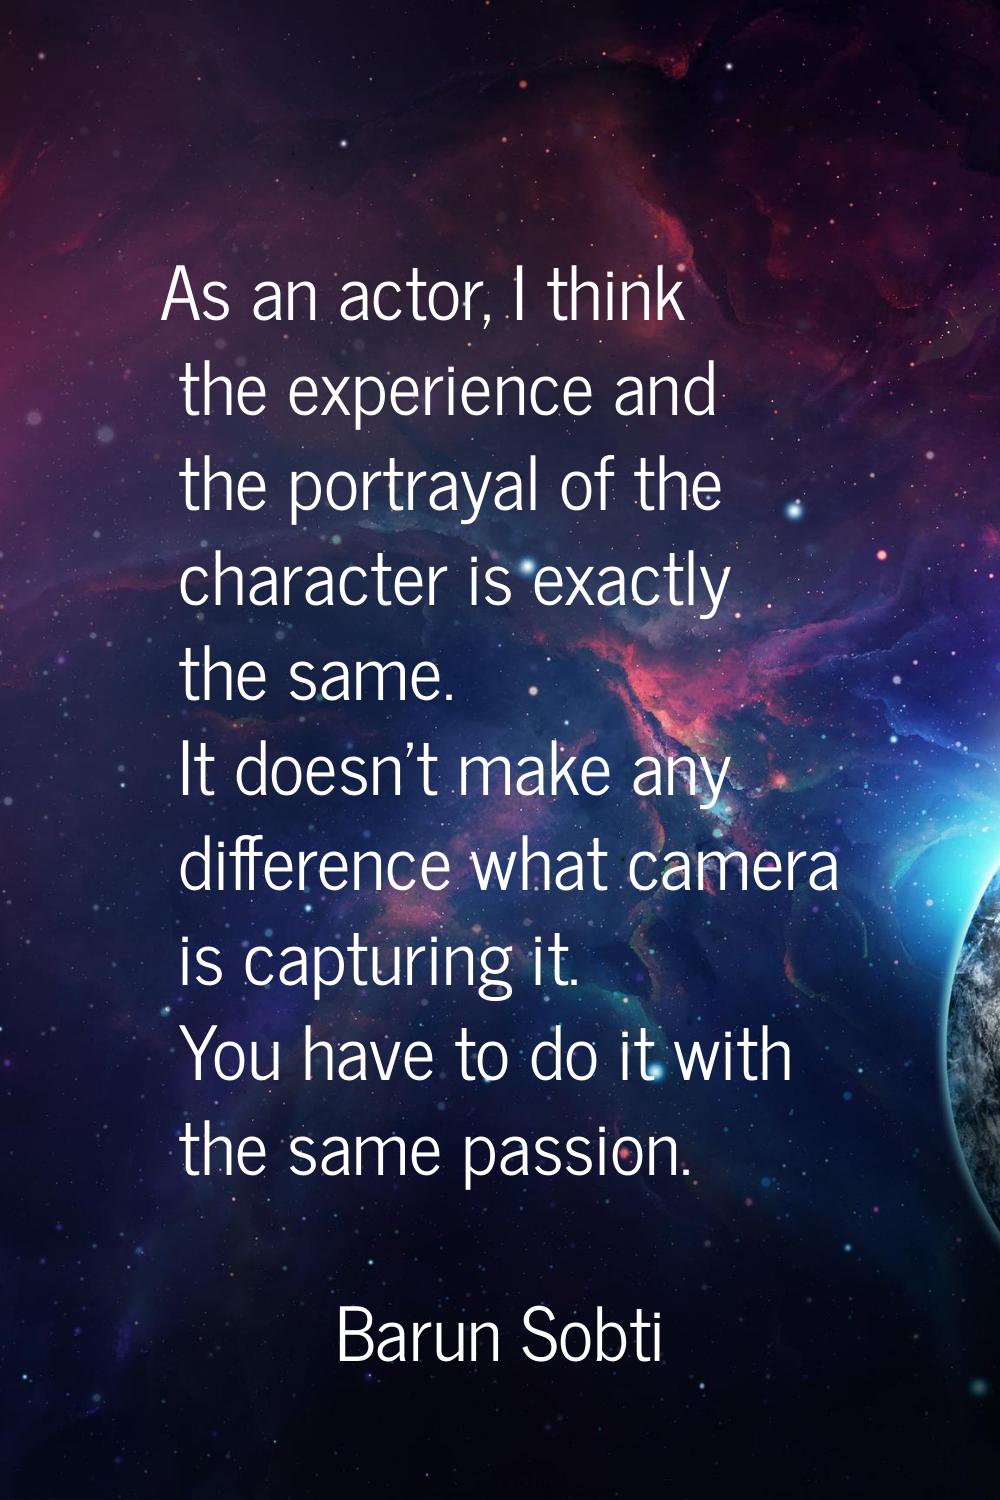 As an actor, I think the experience and the portrayal of the character is exactly the same. It does